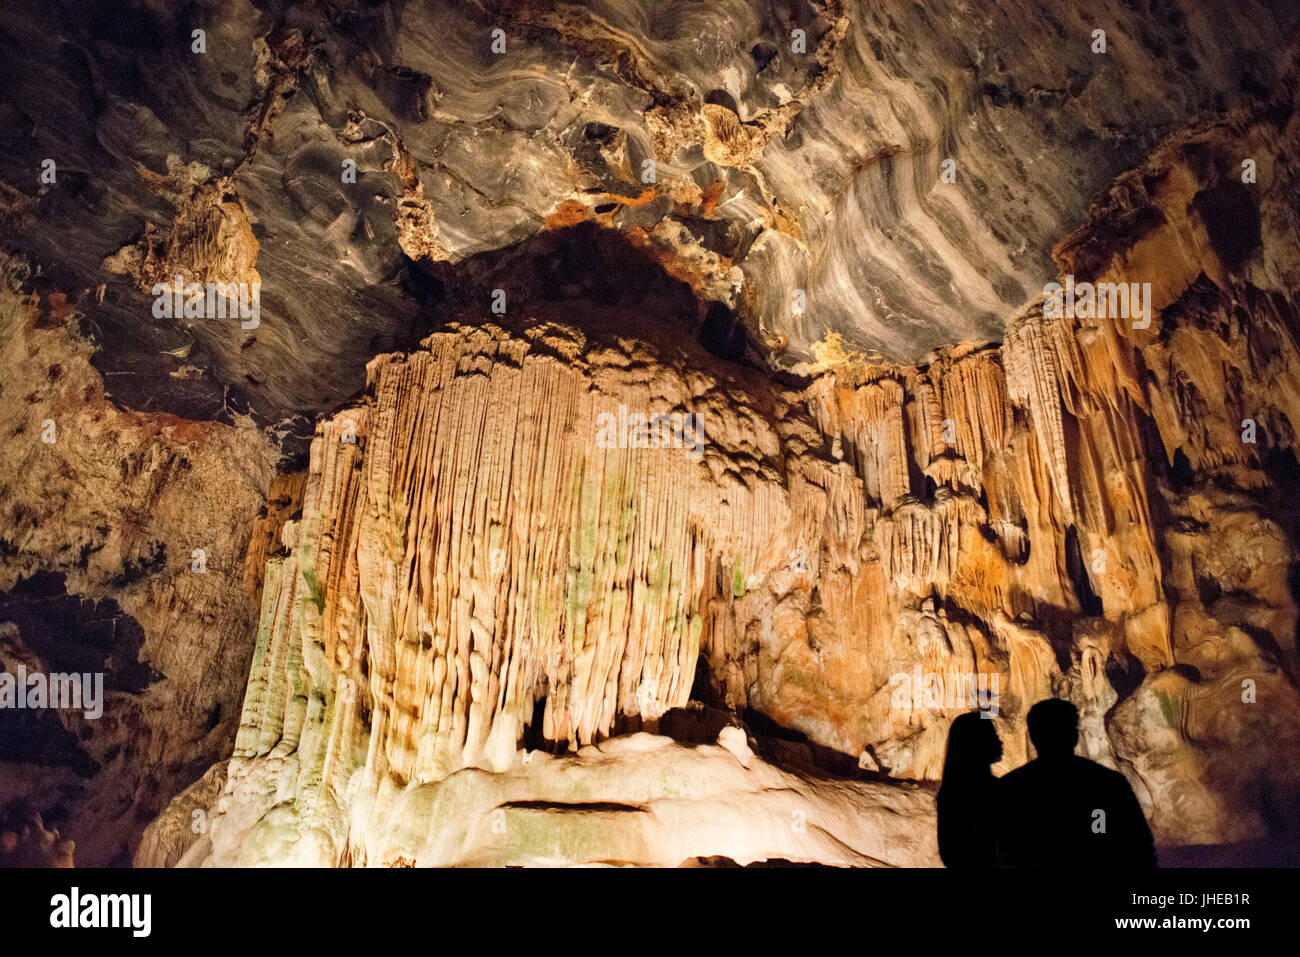 Stalactites and stalagmites in the Cango Caves, Oudtshoorn, Western Cape, South Africa Stock Photo